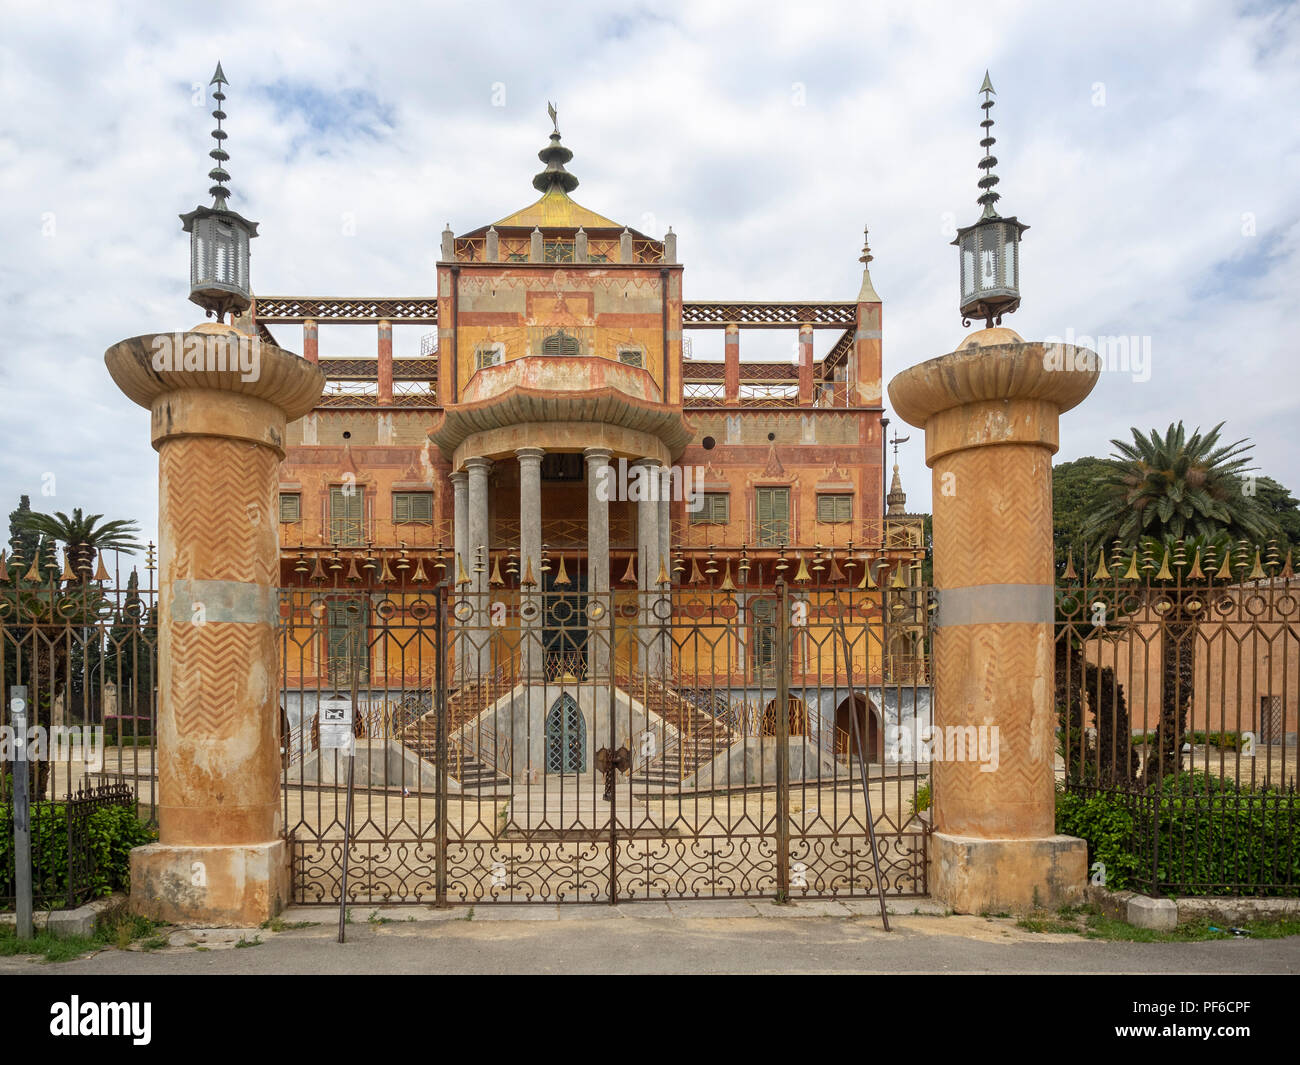 PALERMO, SICILY, ITALY - MAY 21, 2018:  Exterior view of the Chinese Palace Palazzina Cinese) Stock Photo